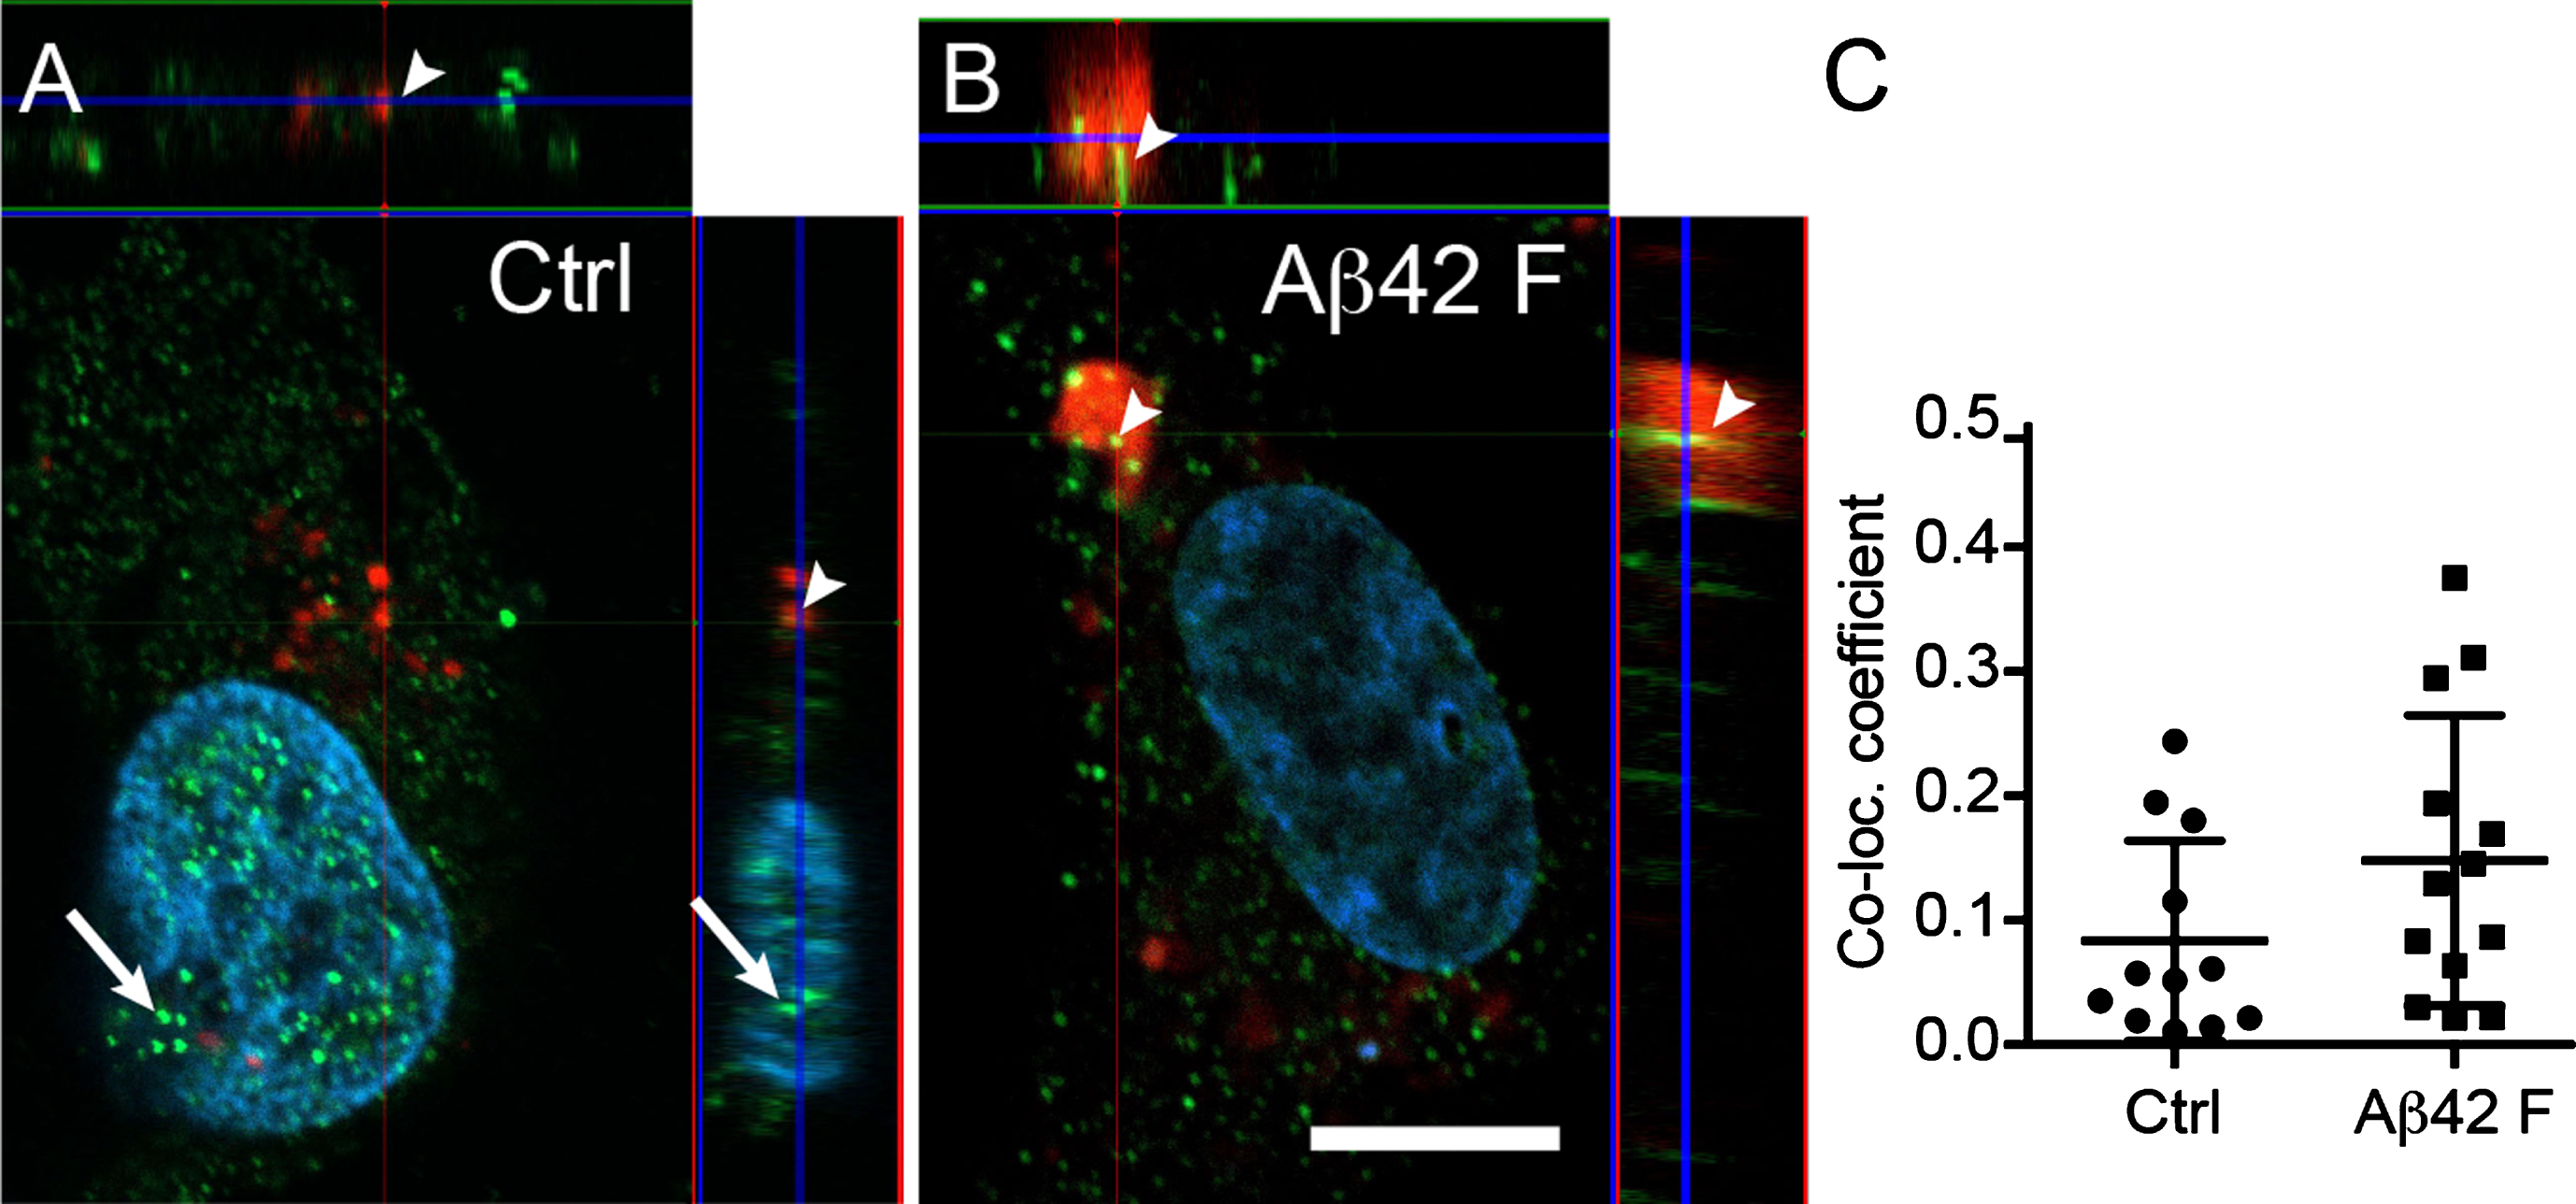 Astrocytic α-amylase can be found within the cytosol, in lysosomes and in the cell nucleus. Confocal images in (A and B) show an AMY2A immunostaining of HA exposed to Lysotracker RED DND-99 (in red indicated with arrowheads in A and B), vehicle control (Ctrl) and 10 μM Aβ42 fibrils (Aβ42 F). The AMY2A (in green in A and B) was found within the cytosol but some AMY2A (indicated with arrows in A) was also found within the DAPI stained cell nucleus (in blue). The AMY2A (arrowheads in A and B) was also found within lysosomes (red in A and B) and some of the lysosomes were enlarged in the Aβ42 F stimulated HA cells (B). Scale bar = 5 μm. Column scatter plots in (C) show the co-localization coefficient AMY2A within lysosomes in the stimulated HA. No significant change in co-localization between Aβ42 F and Ctrl stimulated HA cells was detected. The experiment was independently performed three times and 3-4 cells from each experiment and condition (in total 10 per condition) was analyzed. Data was analyzed using one-way ANOVA with Tukey post-test and presented as mean±SD.